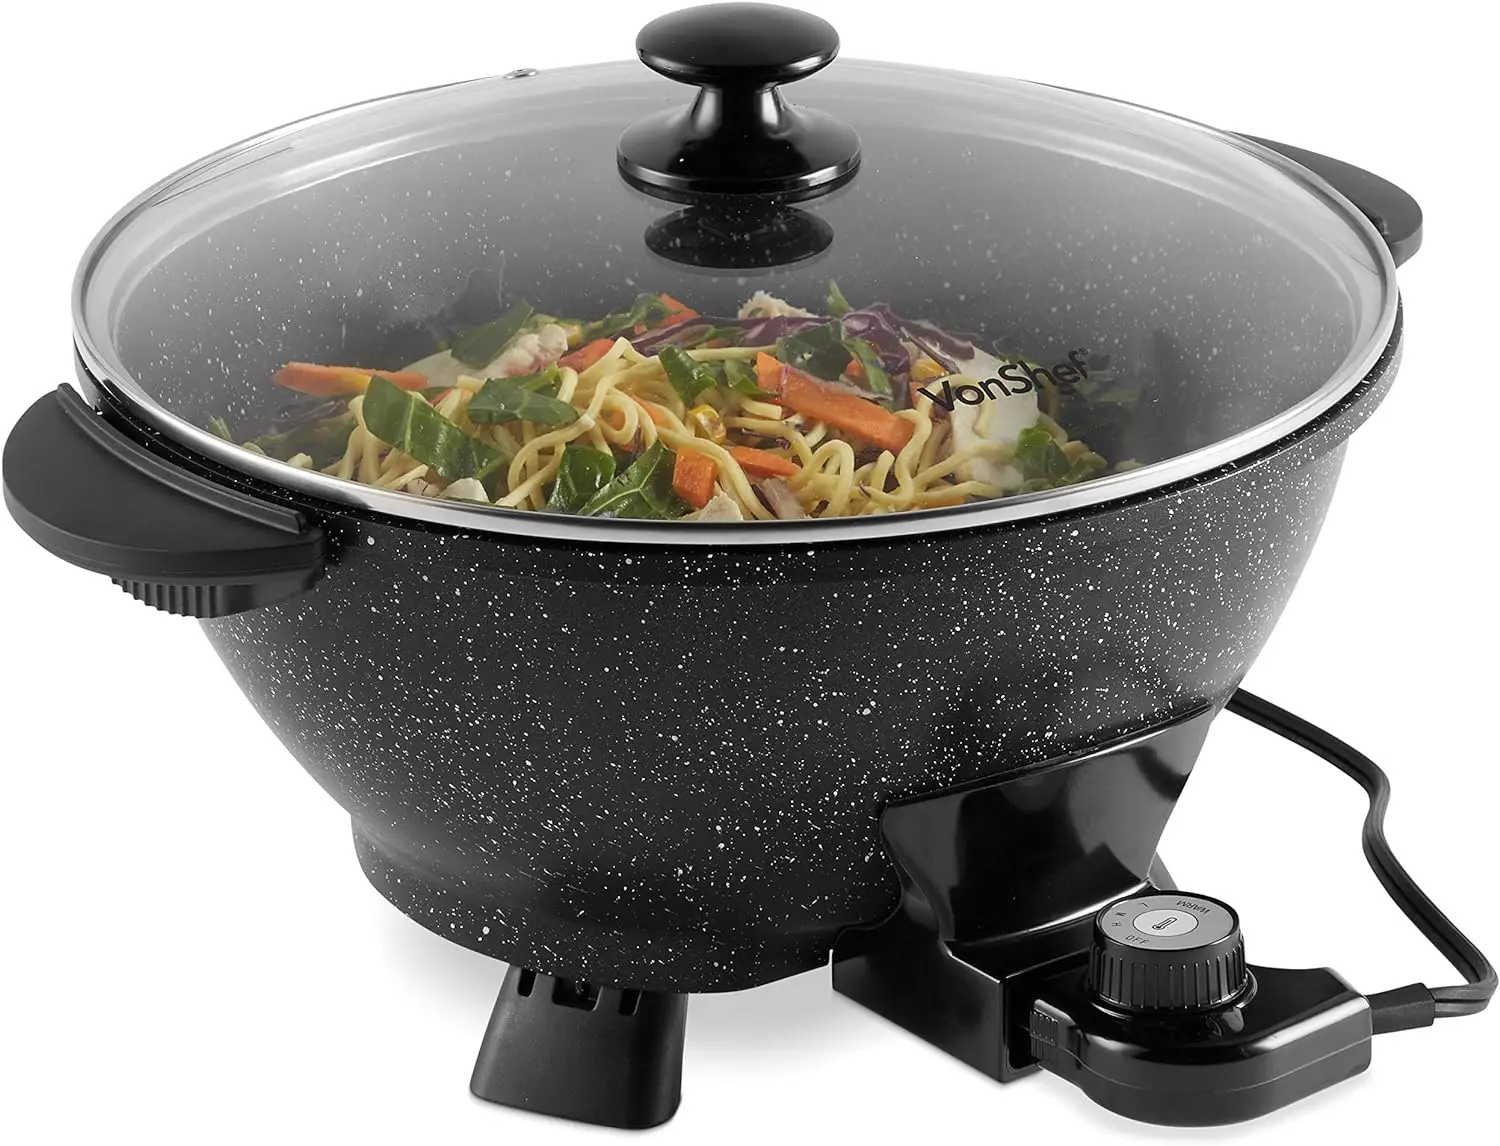 

Wok with Lid \u2013 Adjustable Temperature Control \u2013 Cool Touch Handles \u2013 Non-Stick, Easy Clean Frying Pan - 14 Inch M